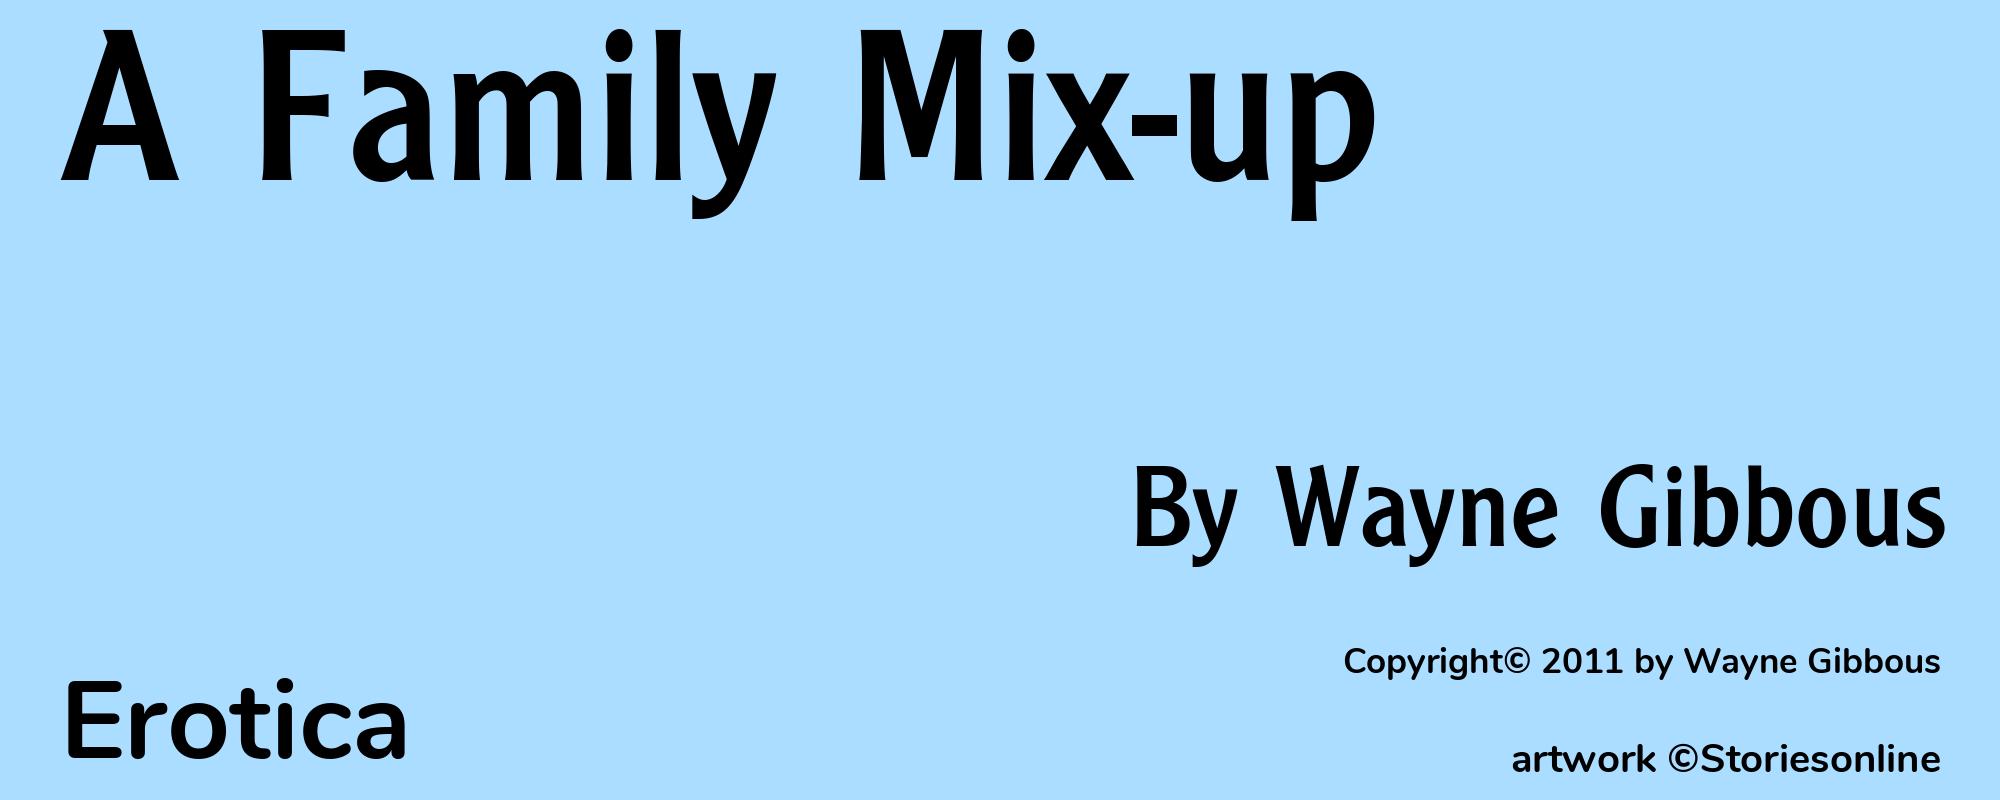 A Family Mix-up - Cover